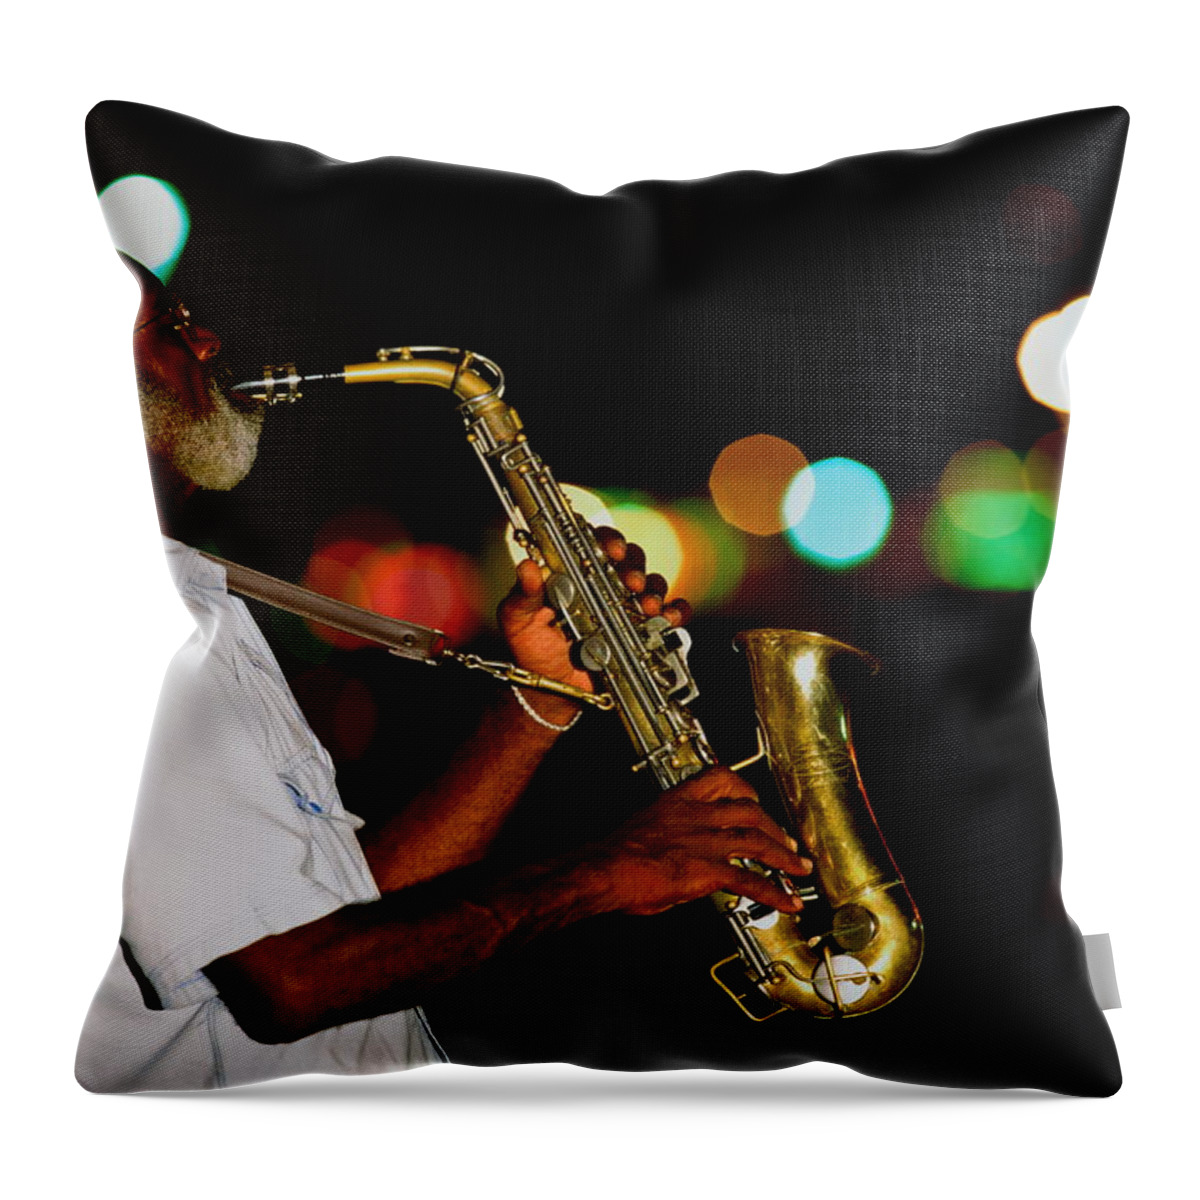 One Man Only Throw Pillow featuring the photograph Saxophonist On Street At Night, New by Siegfried Layda